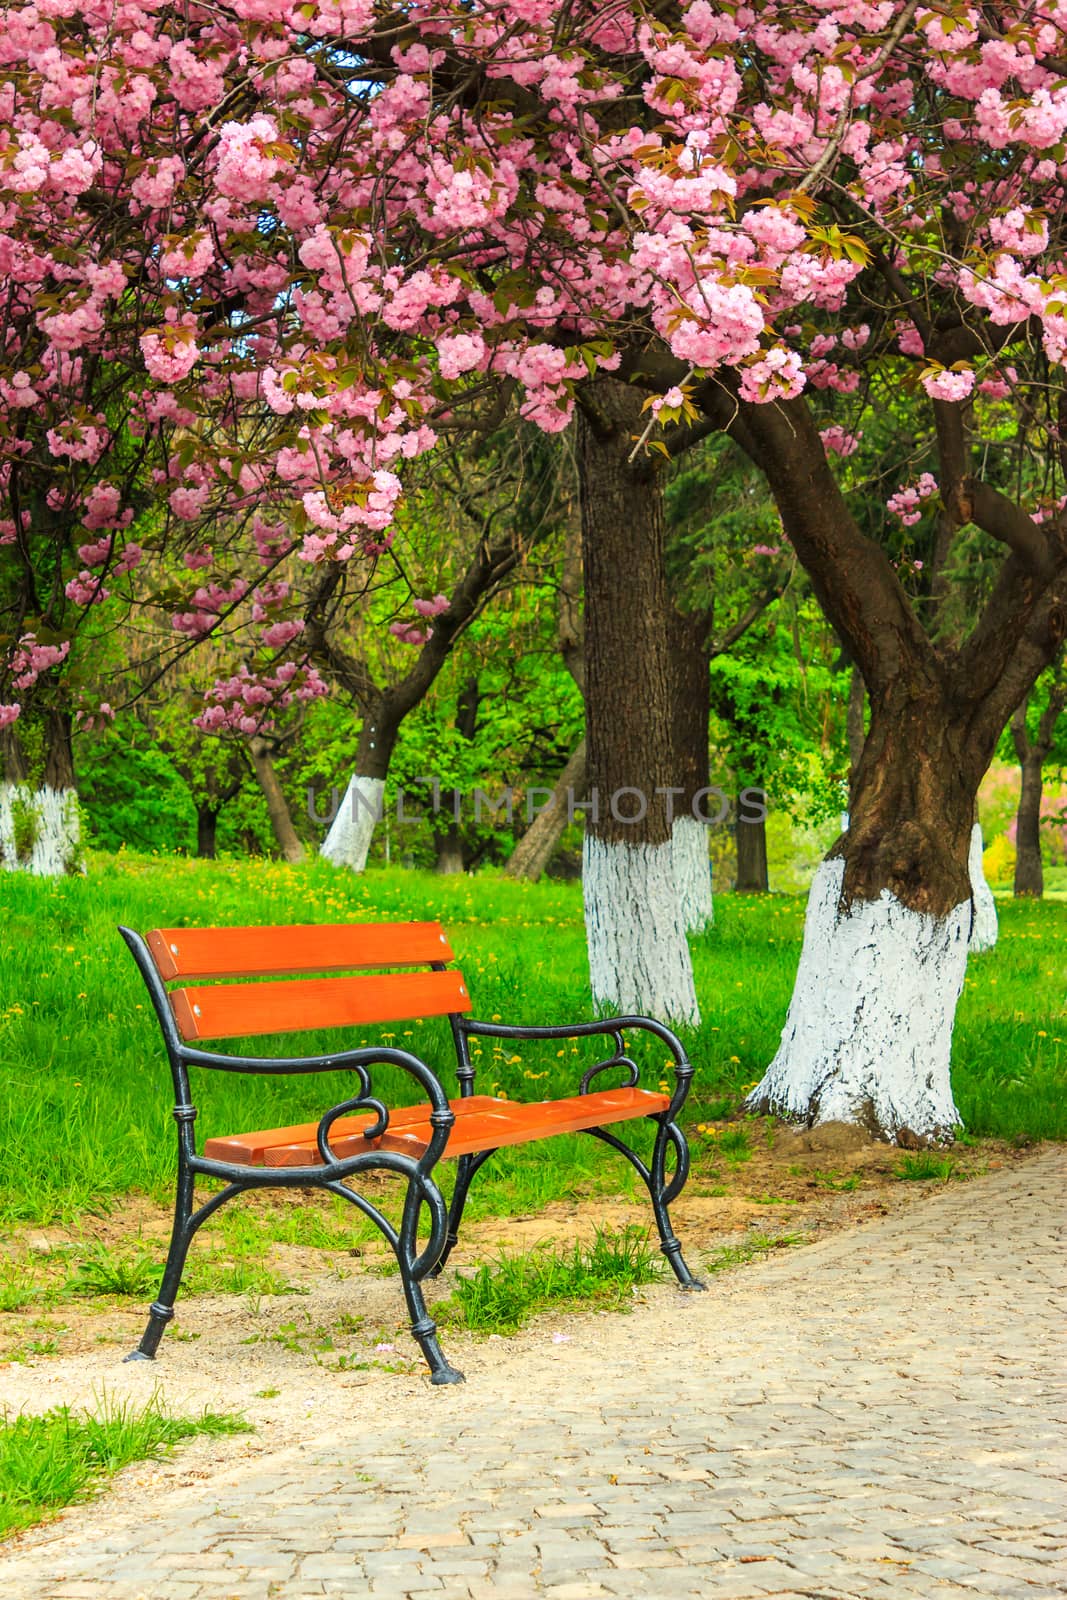 bench on the pavement in the park on a background of grass and s by Pellinni